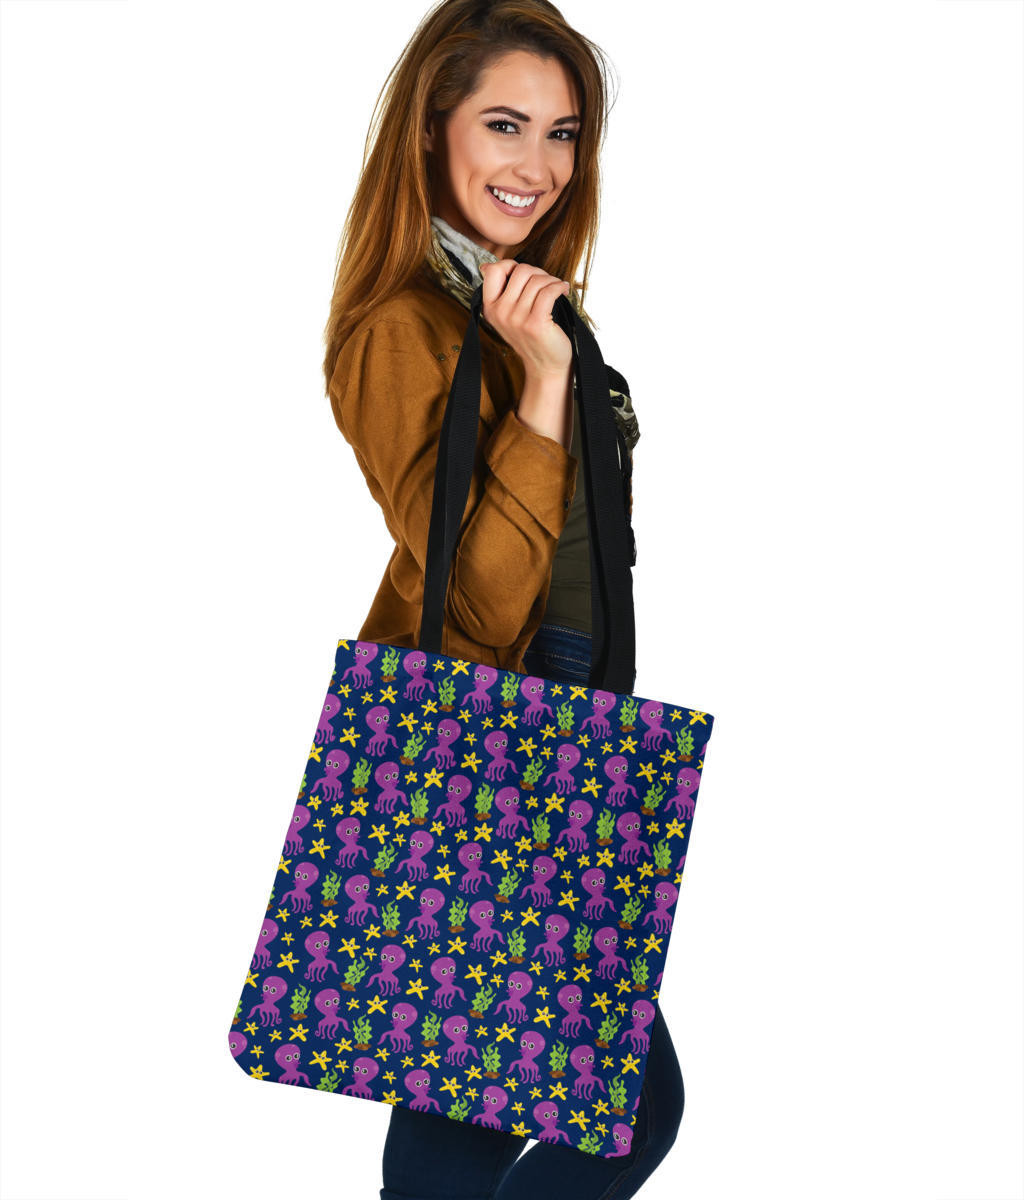 Adorable Octopus Pattern Cloth Tote Bag